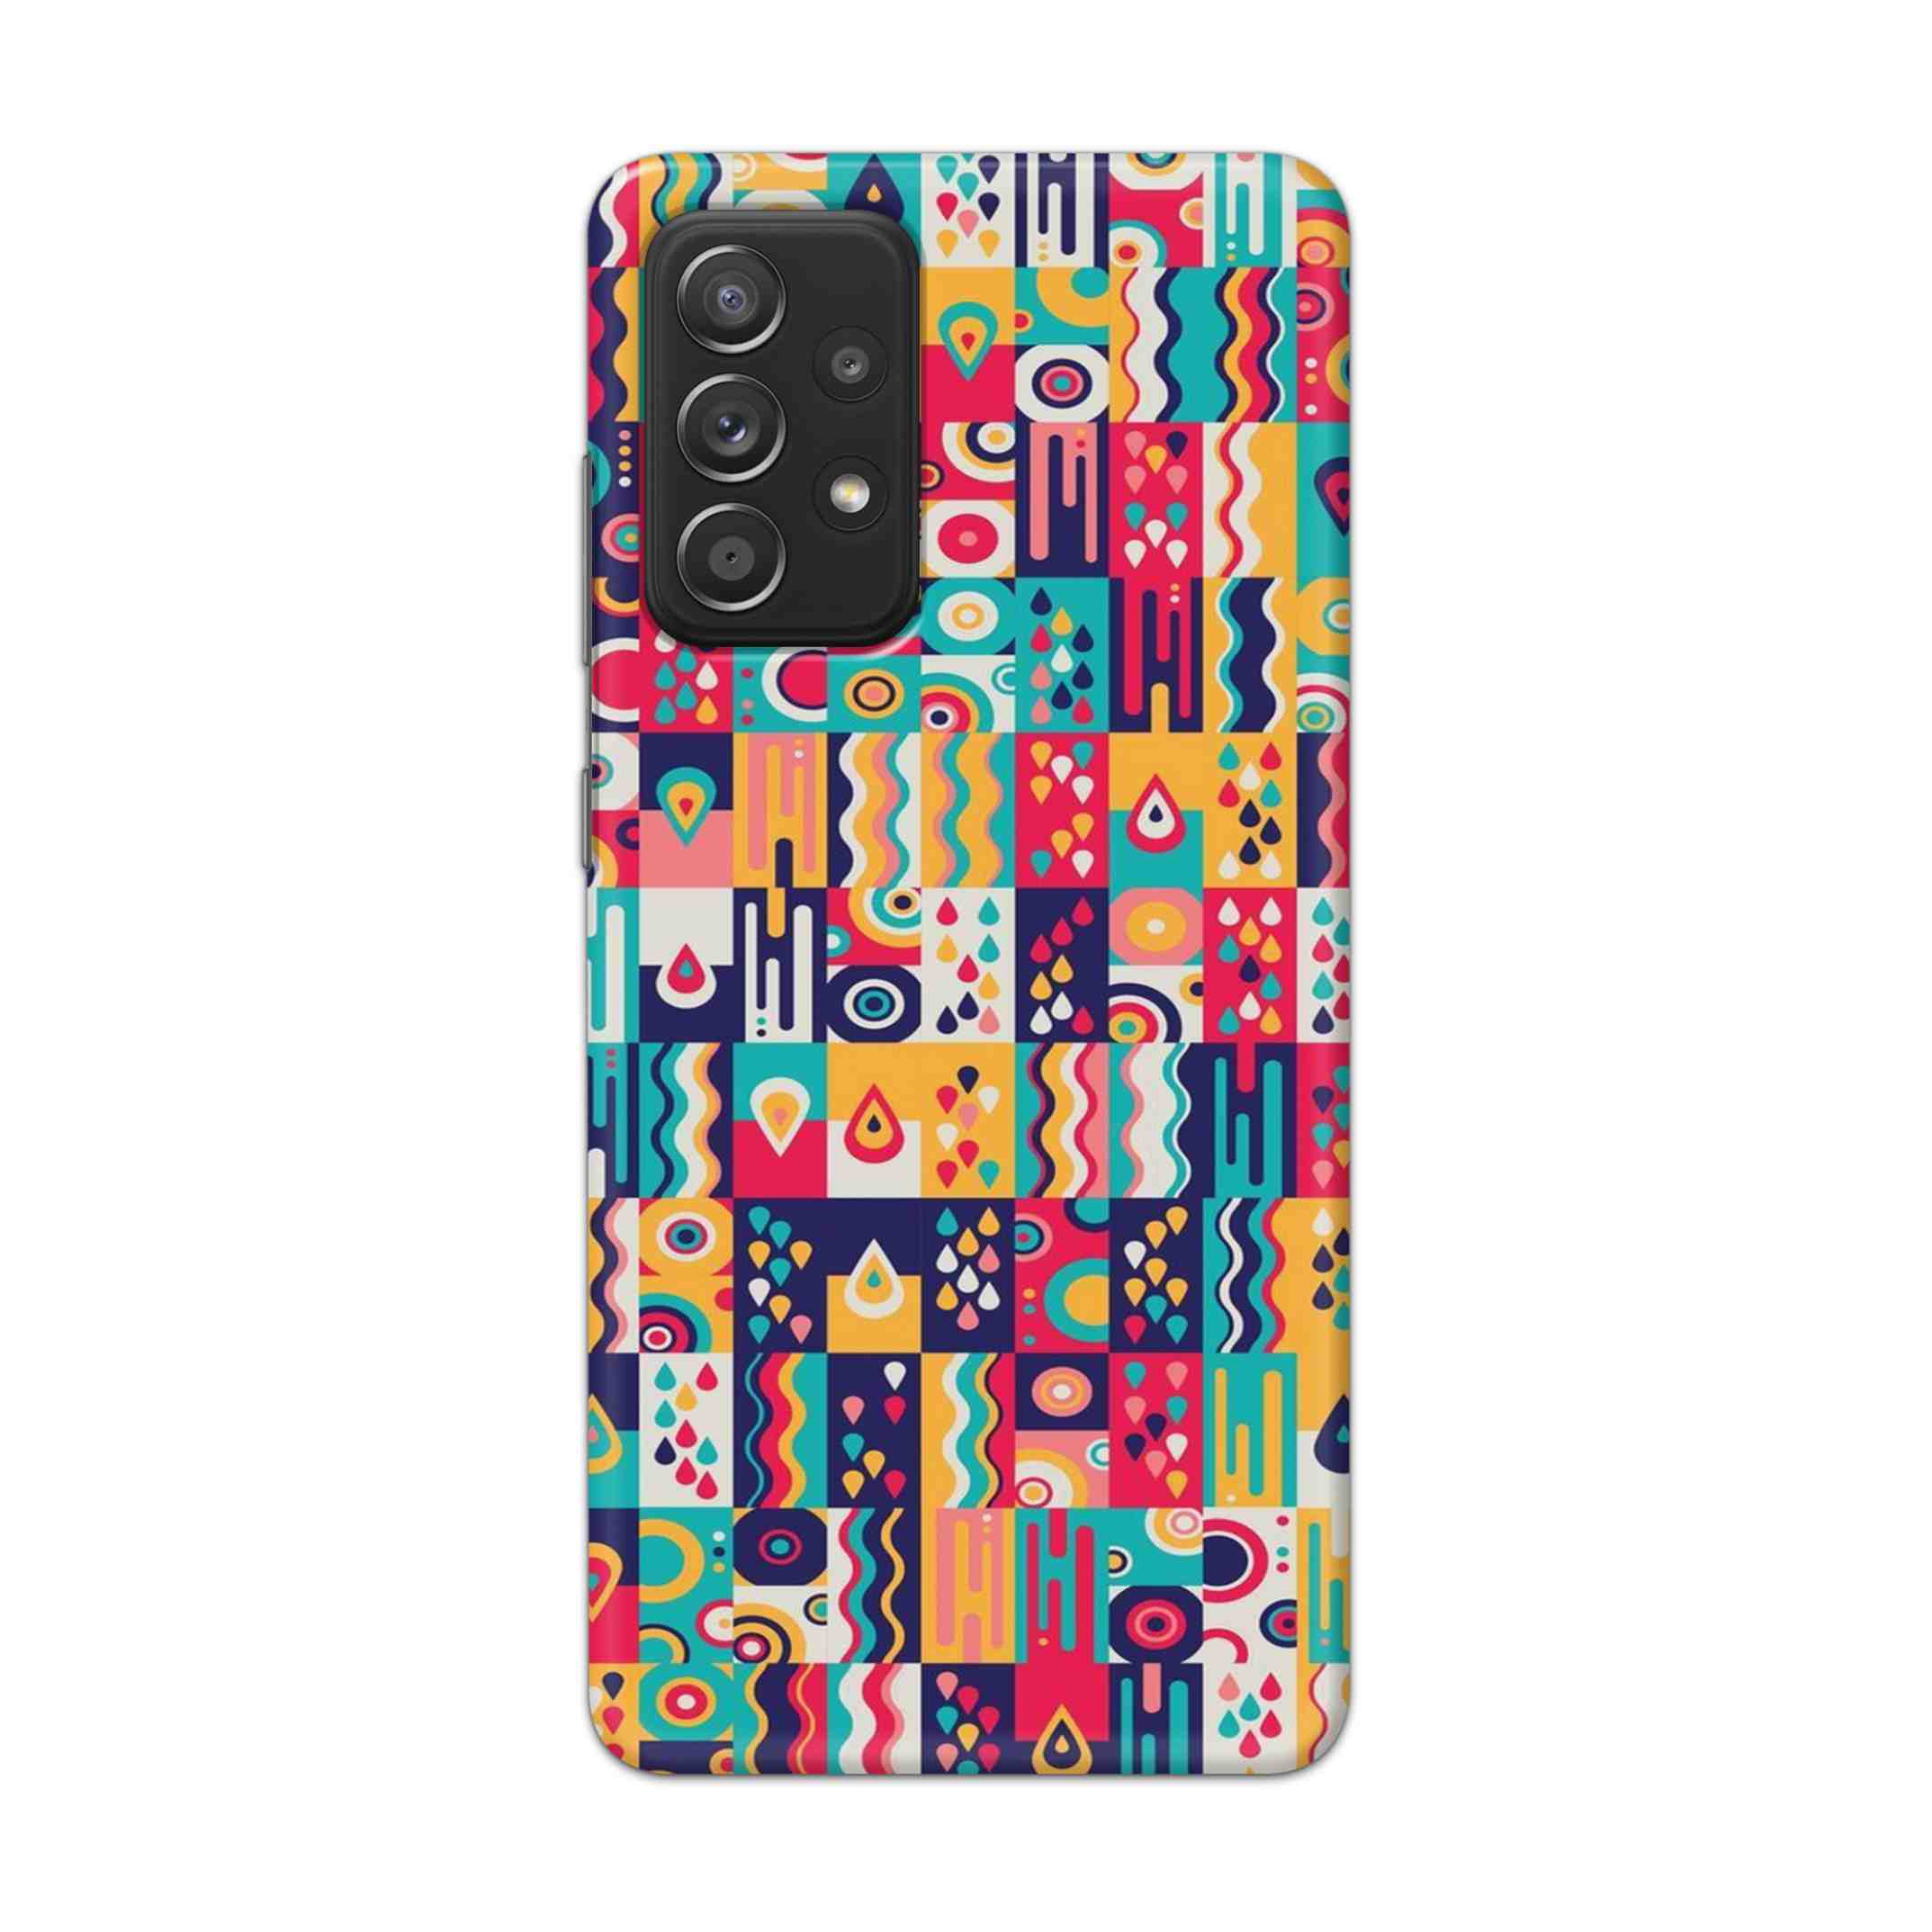 Buy Art Hard Back Mobile Phone Case Cover For Samsung Galaxy A52 Online